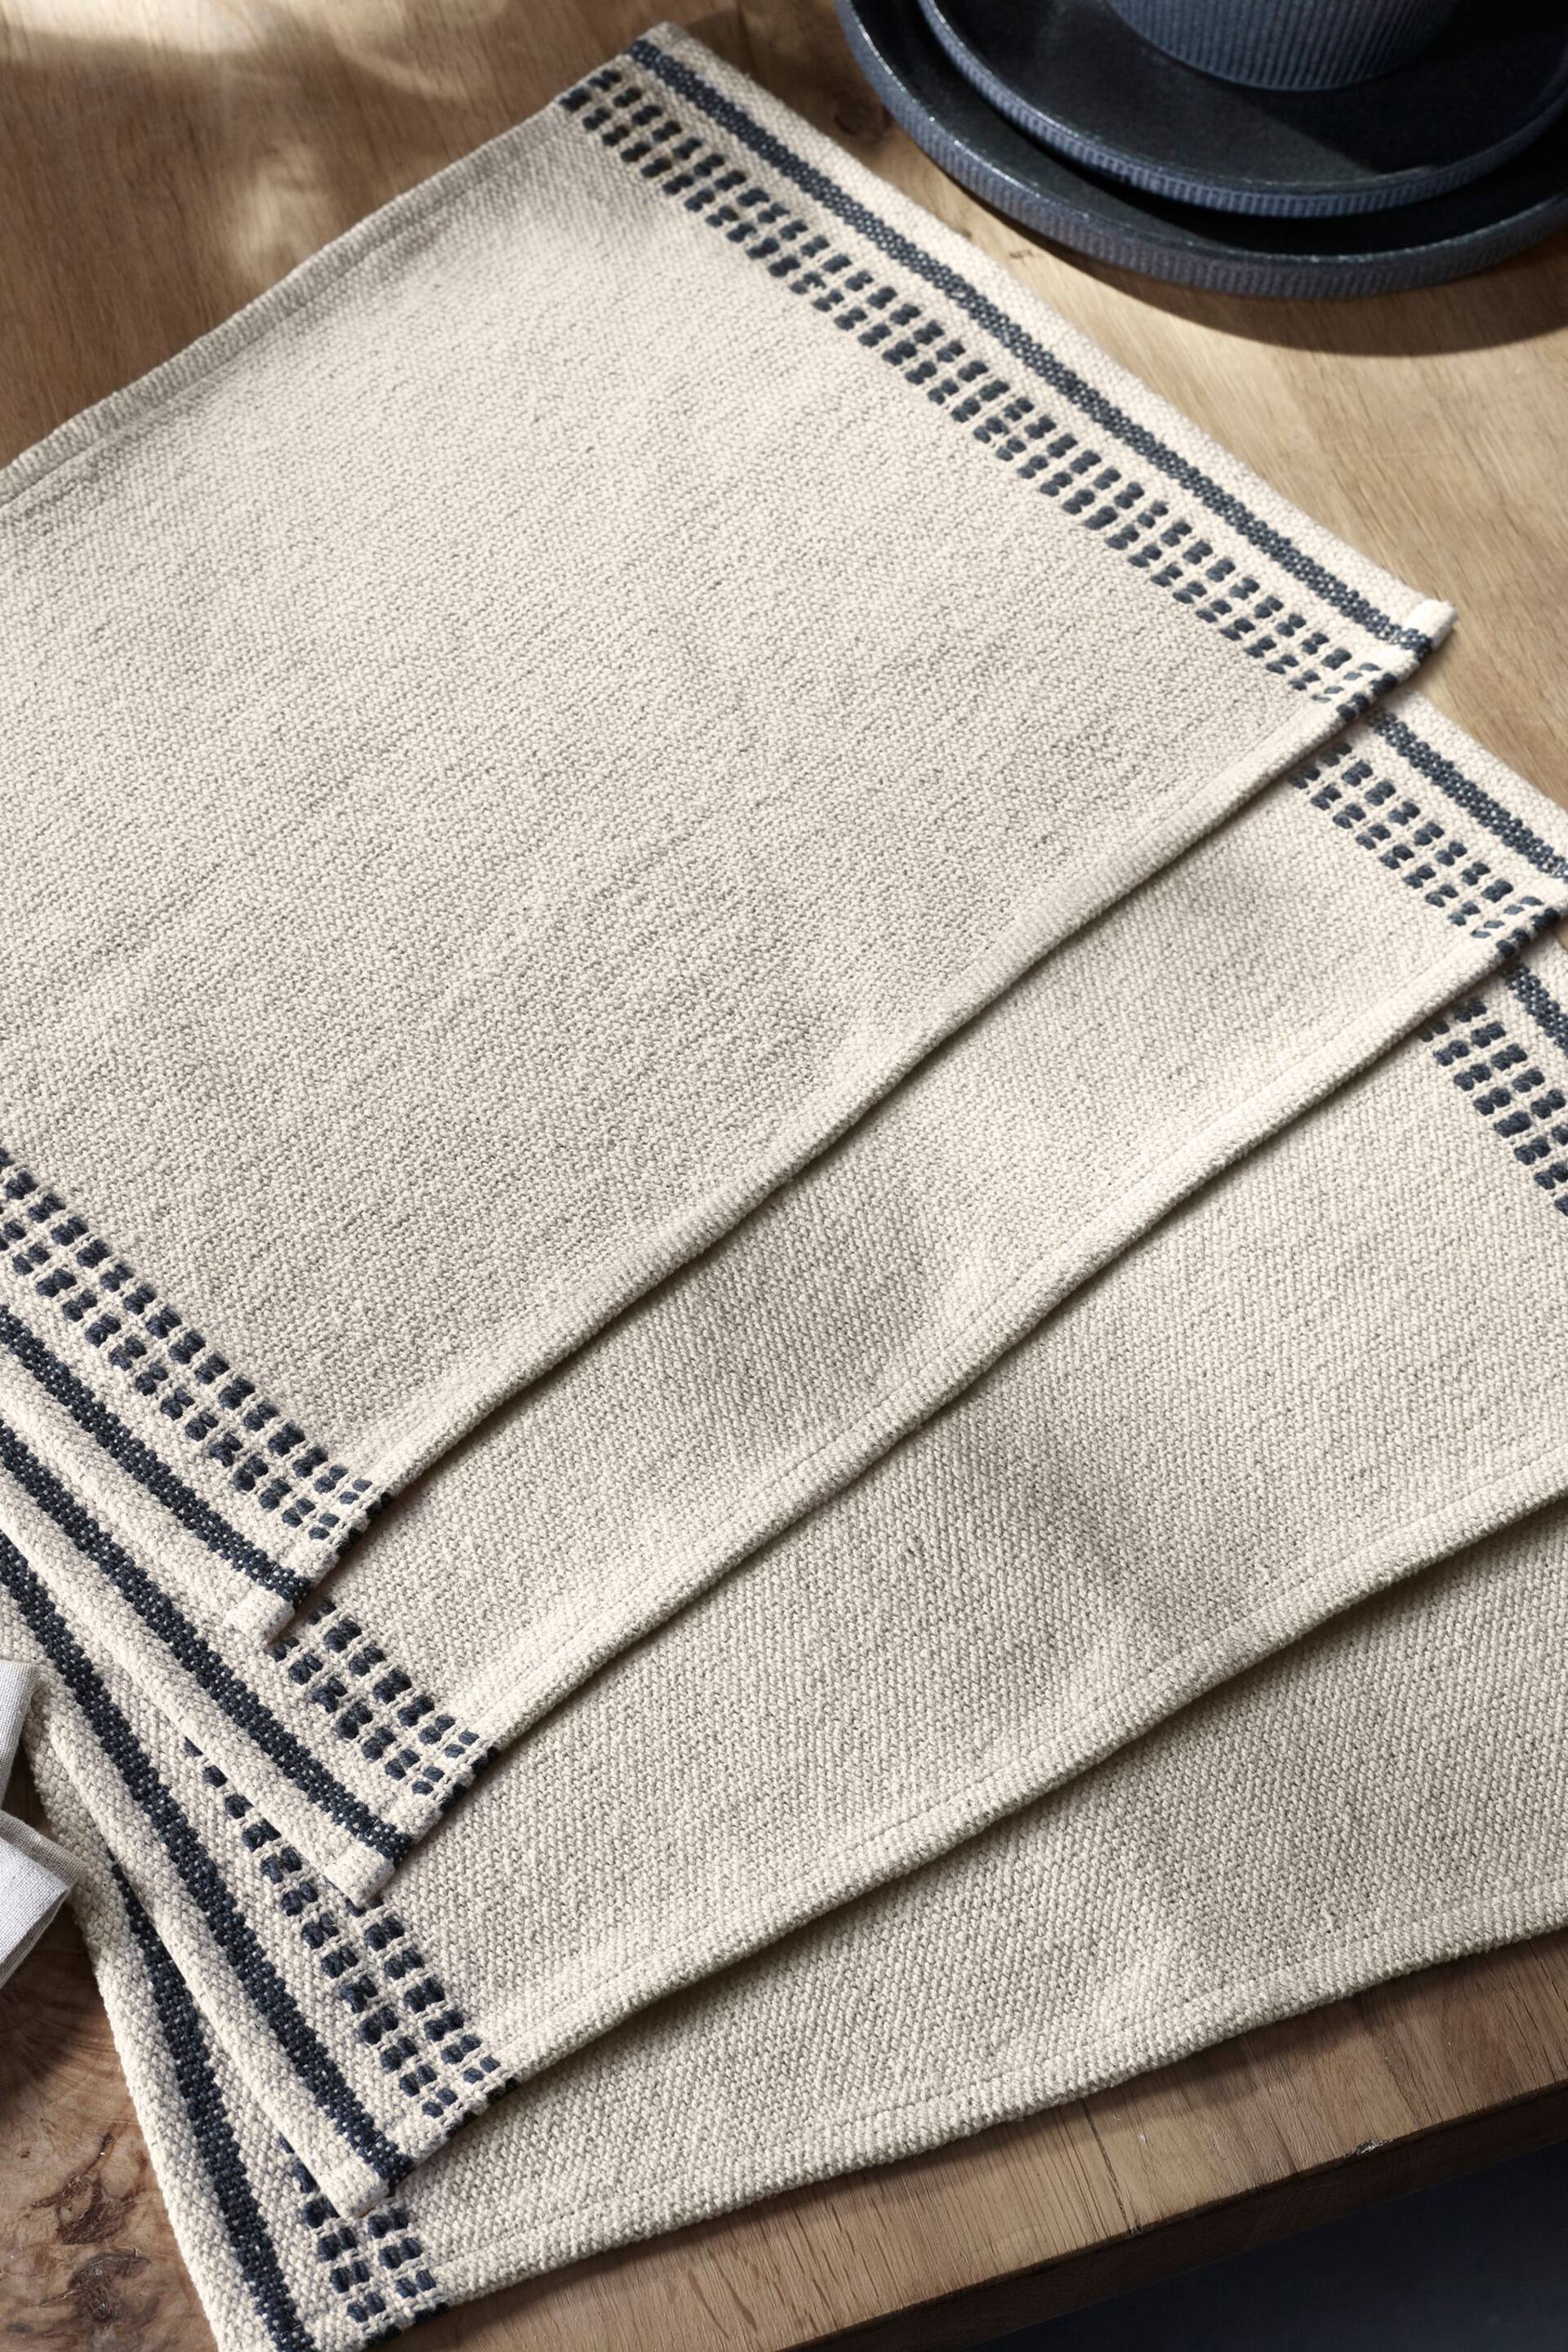 Set of 4 Natural Woven Fabric Placemats - Image 2 of 5